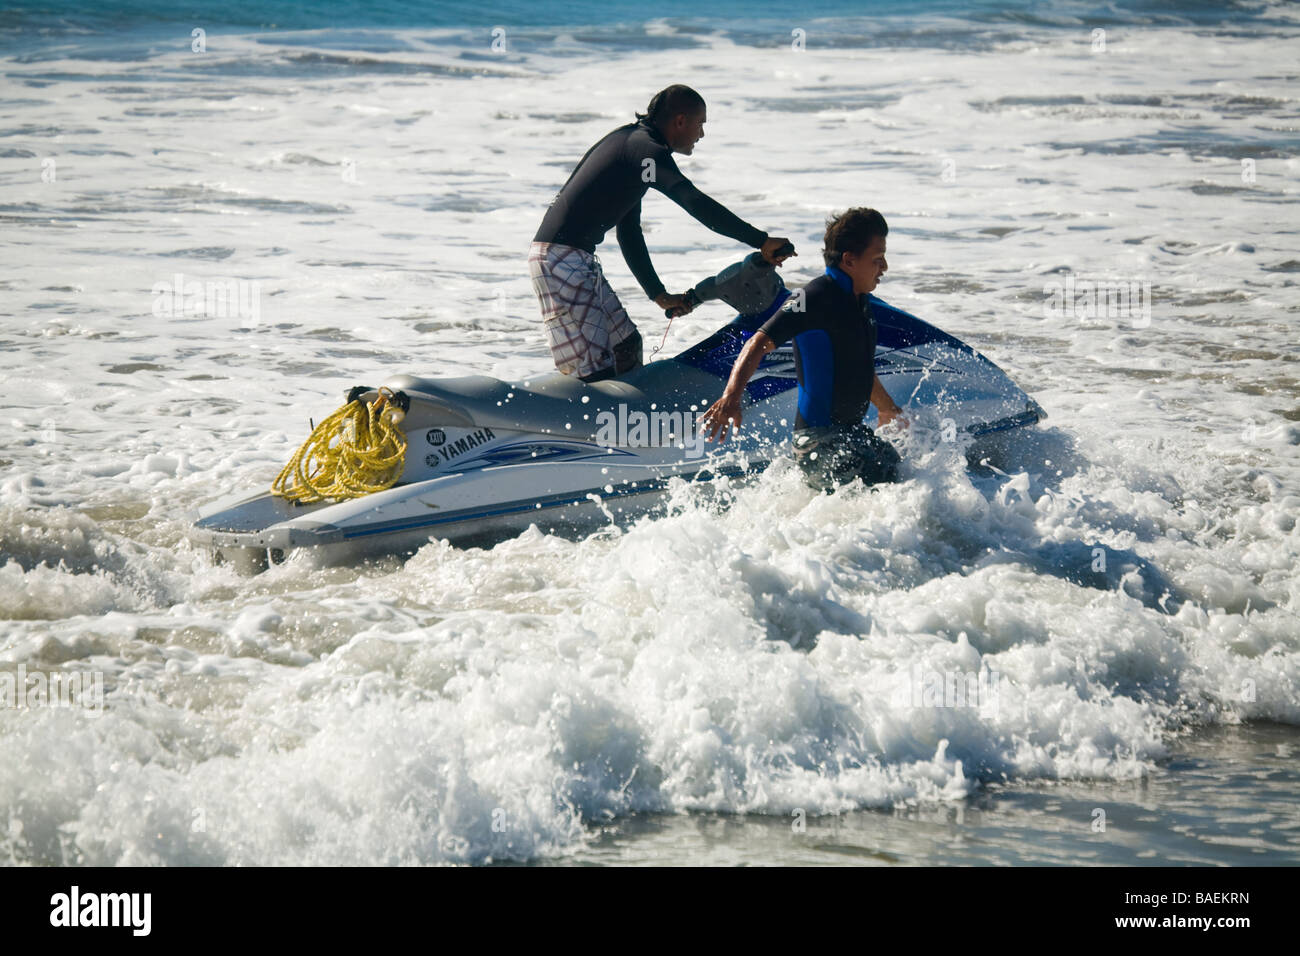 MEXICO San Jose del Cabo Man riding jet ski in shallow water near beach and man running in waves Stock Photo